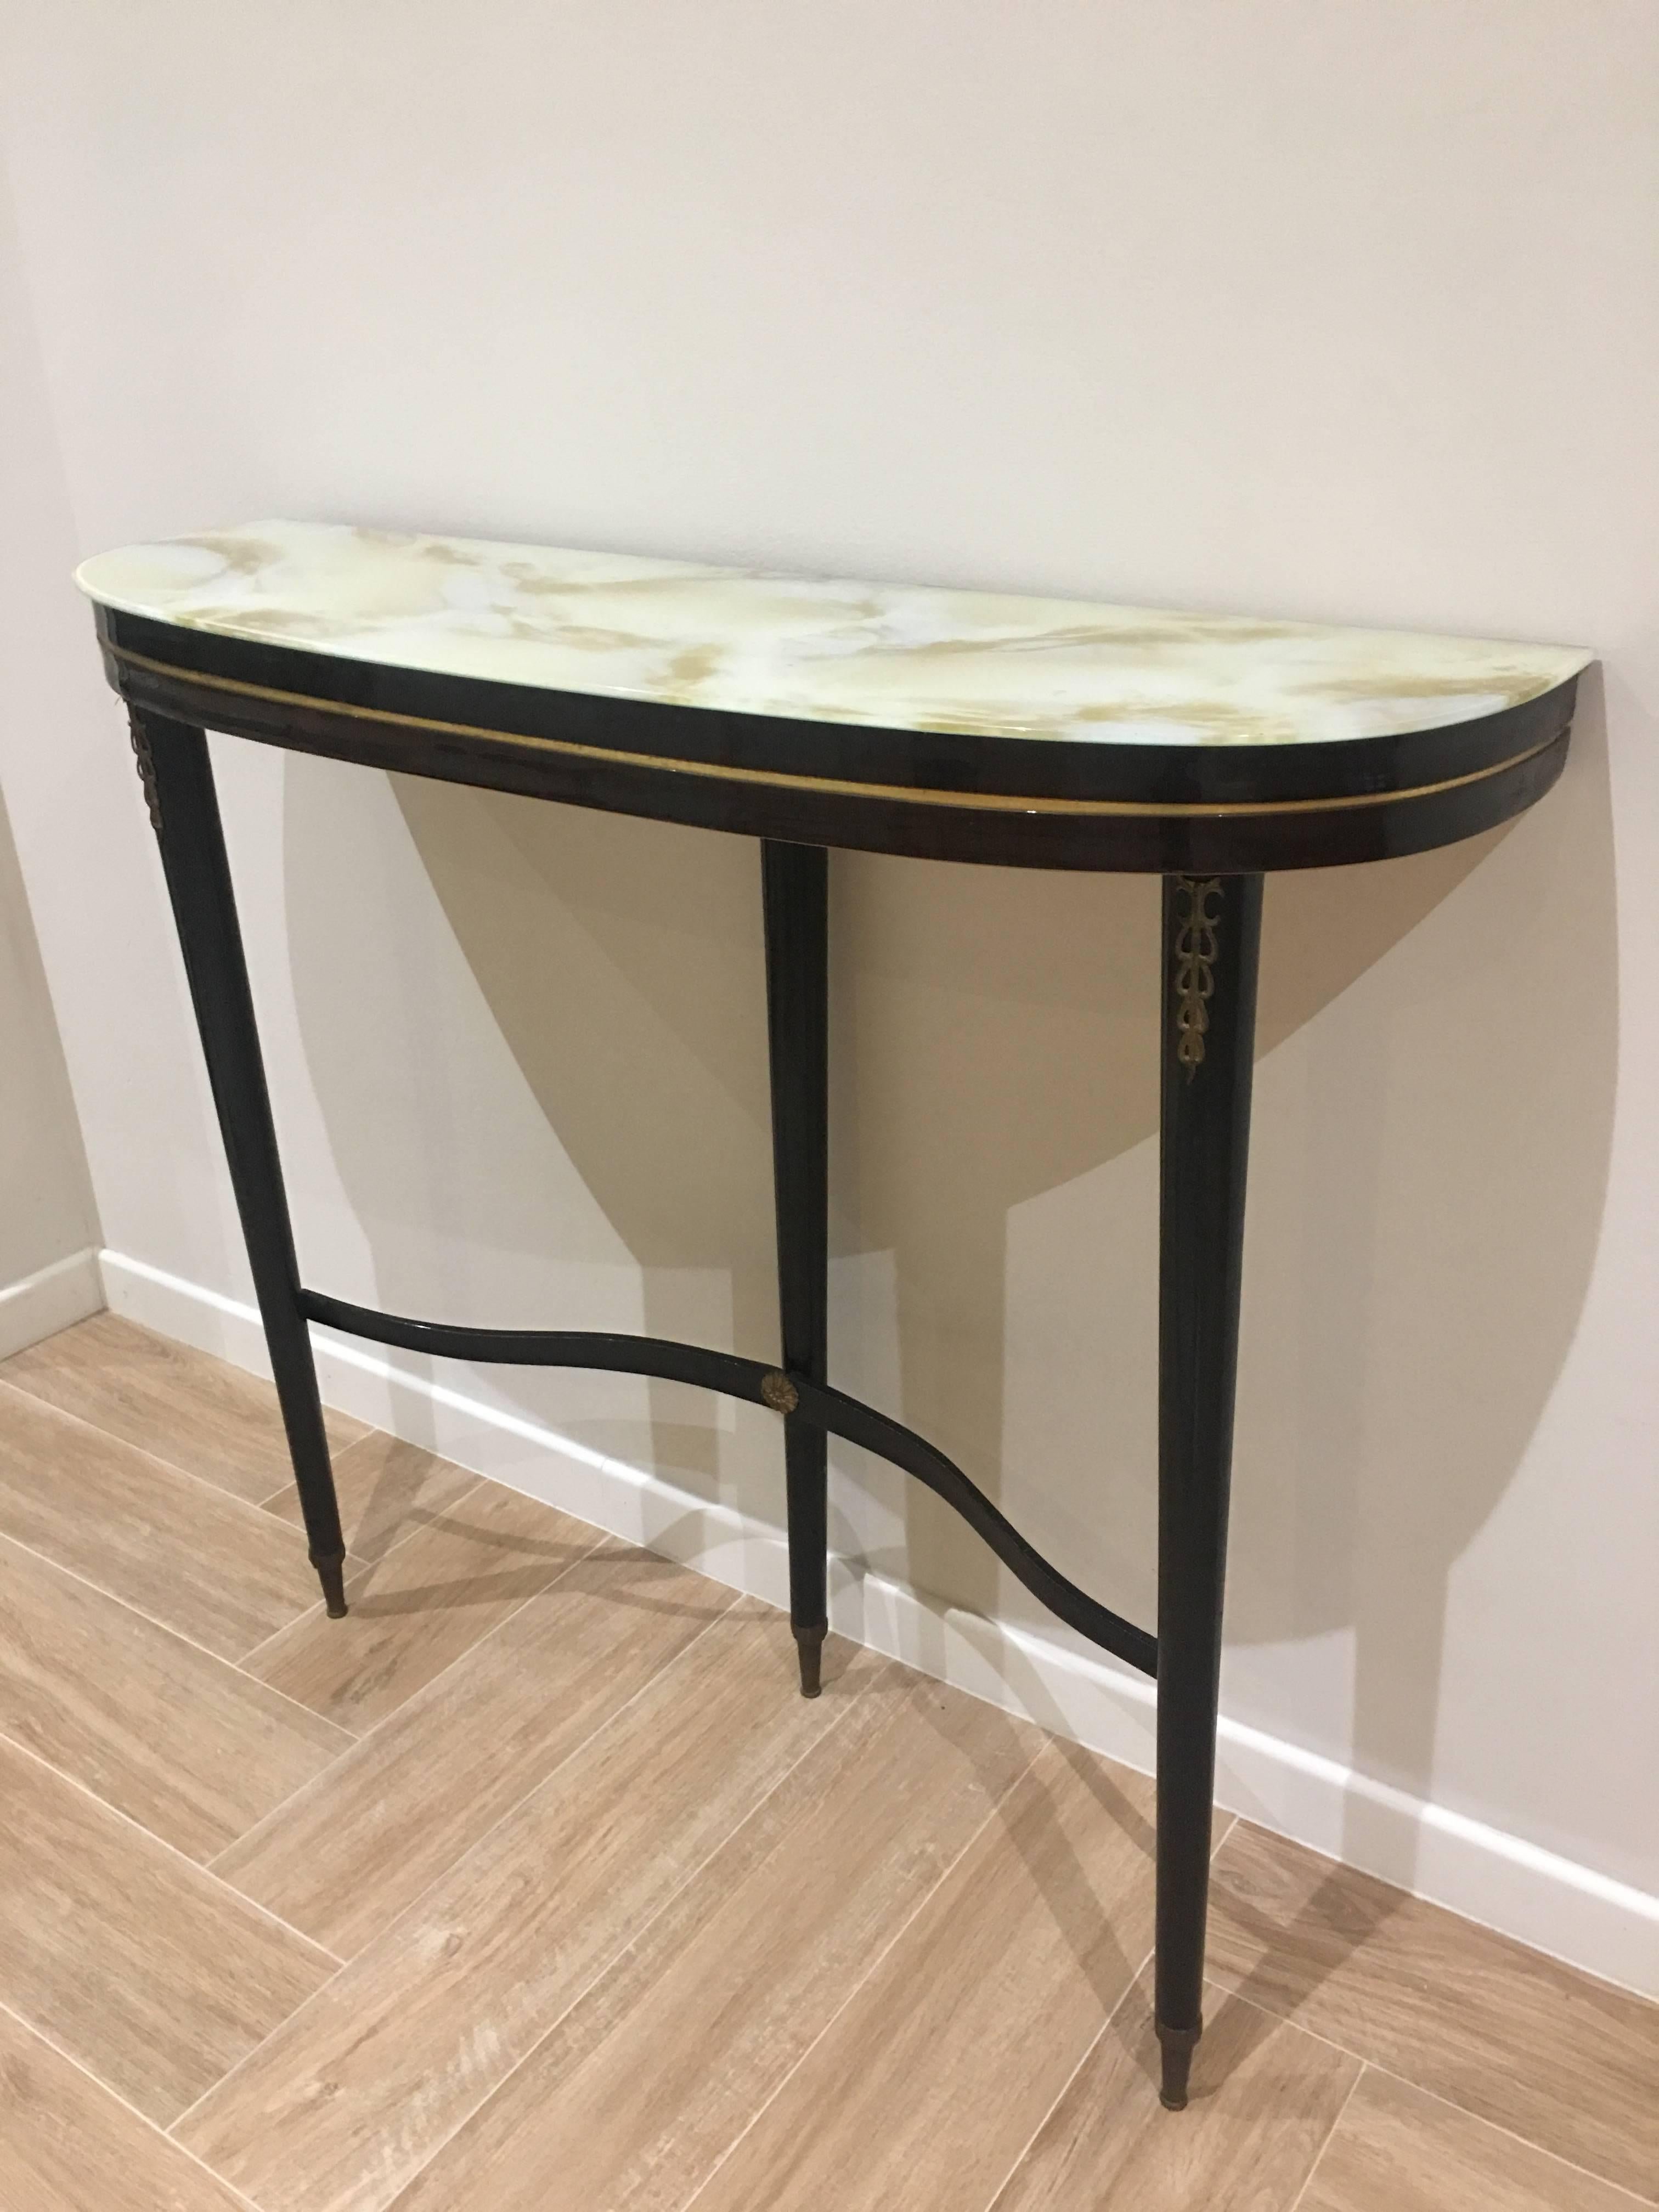 An elegant demilune console from Italy. The top, a thin slice of glass perching upon the lean wooden legs. 
A perfect solution for an entryway, foyer.